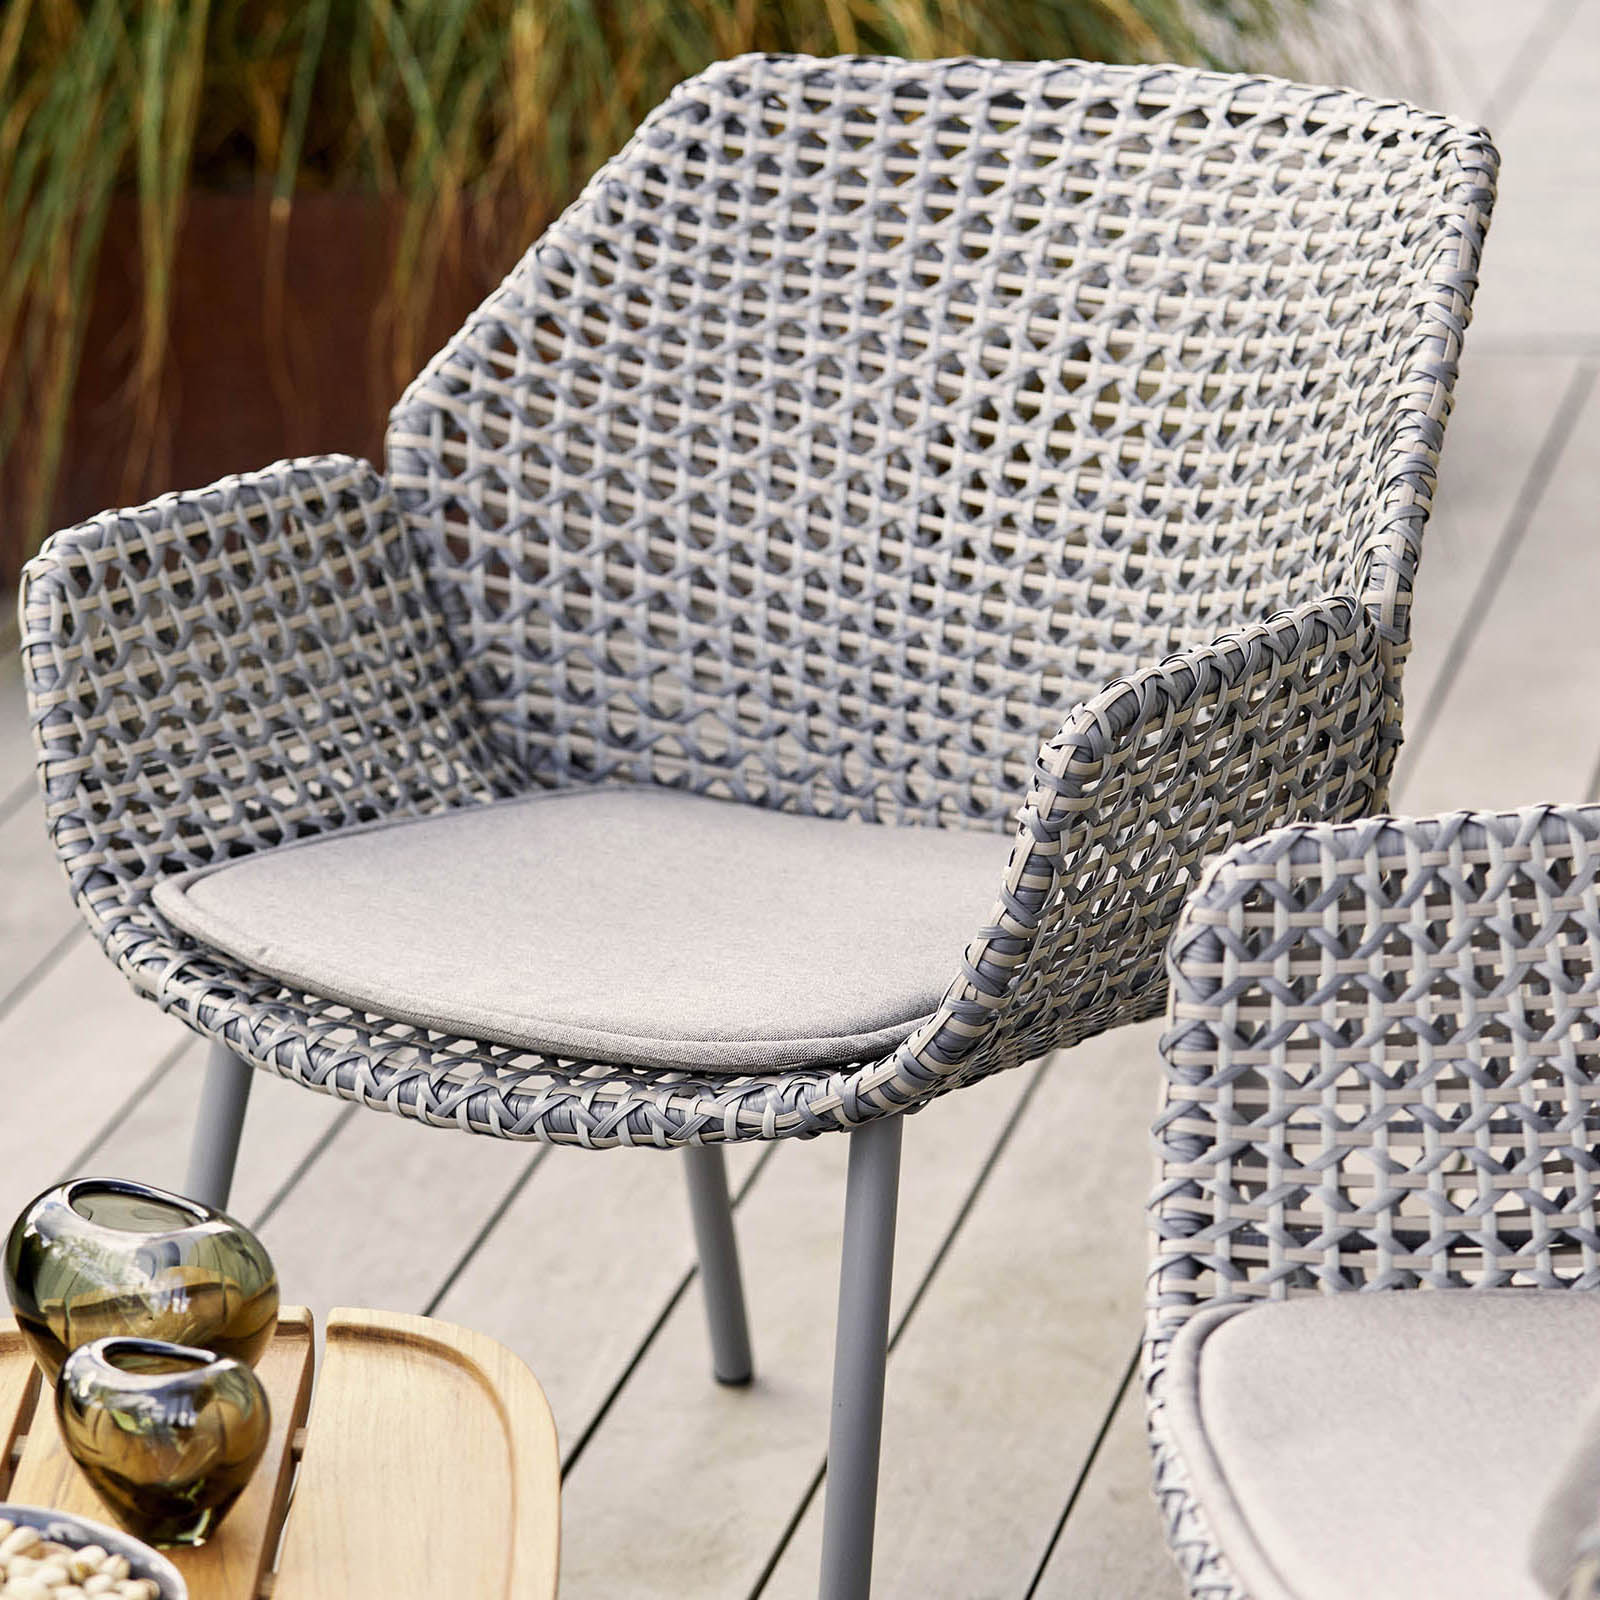 Vibe Loungesessel aus Cane-line Weave in Light Grey